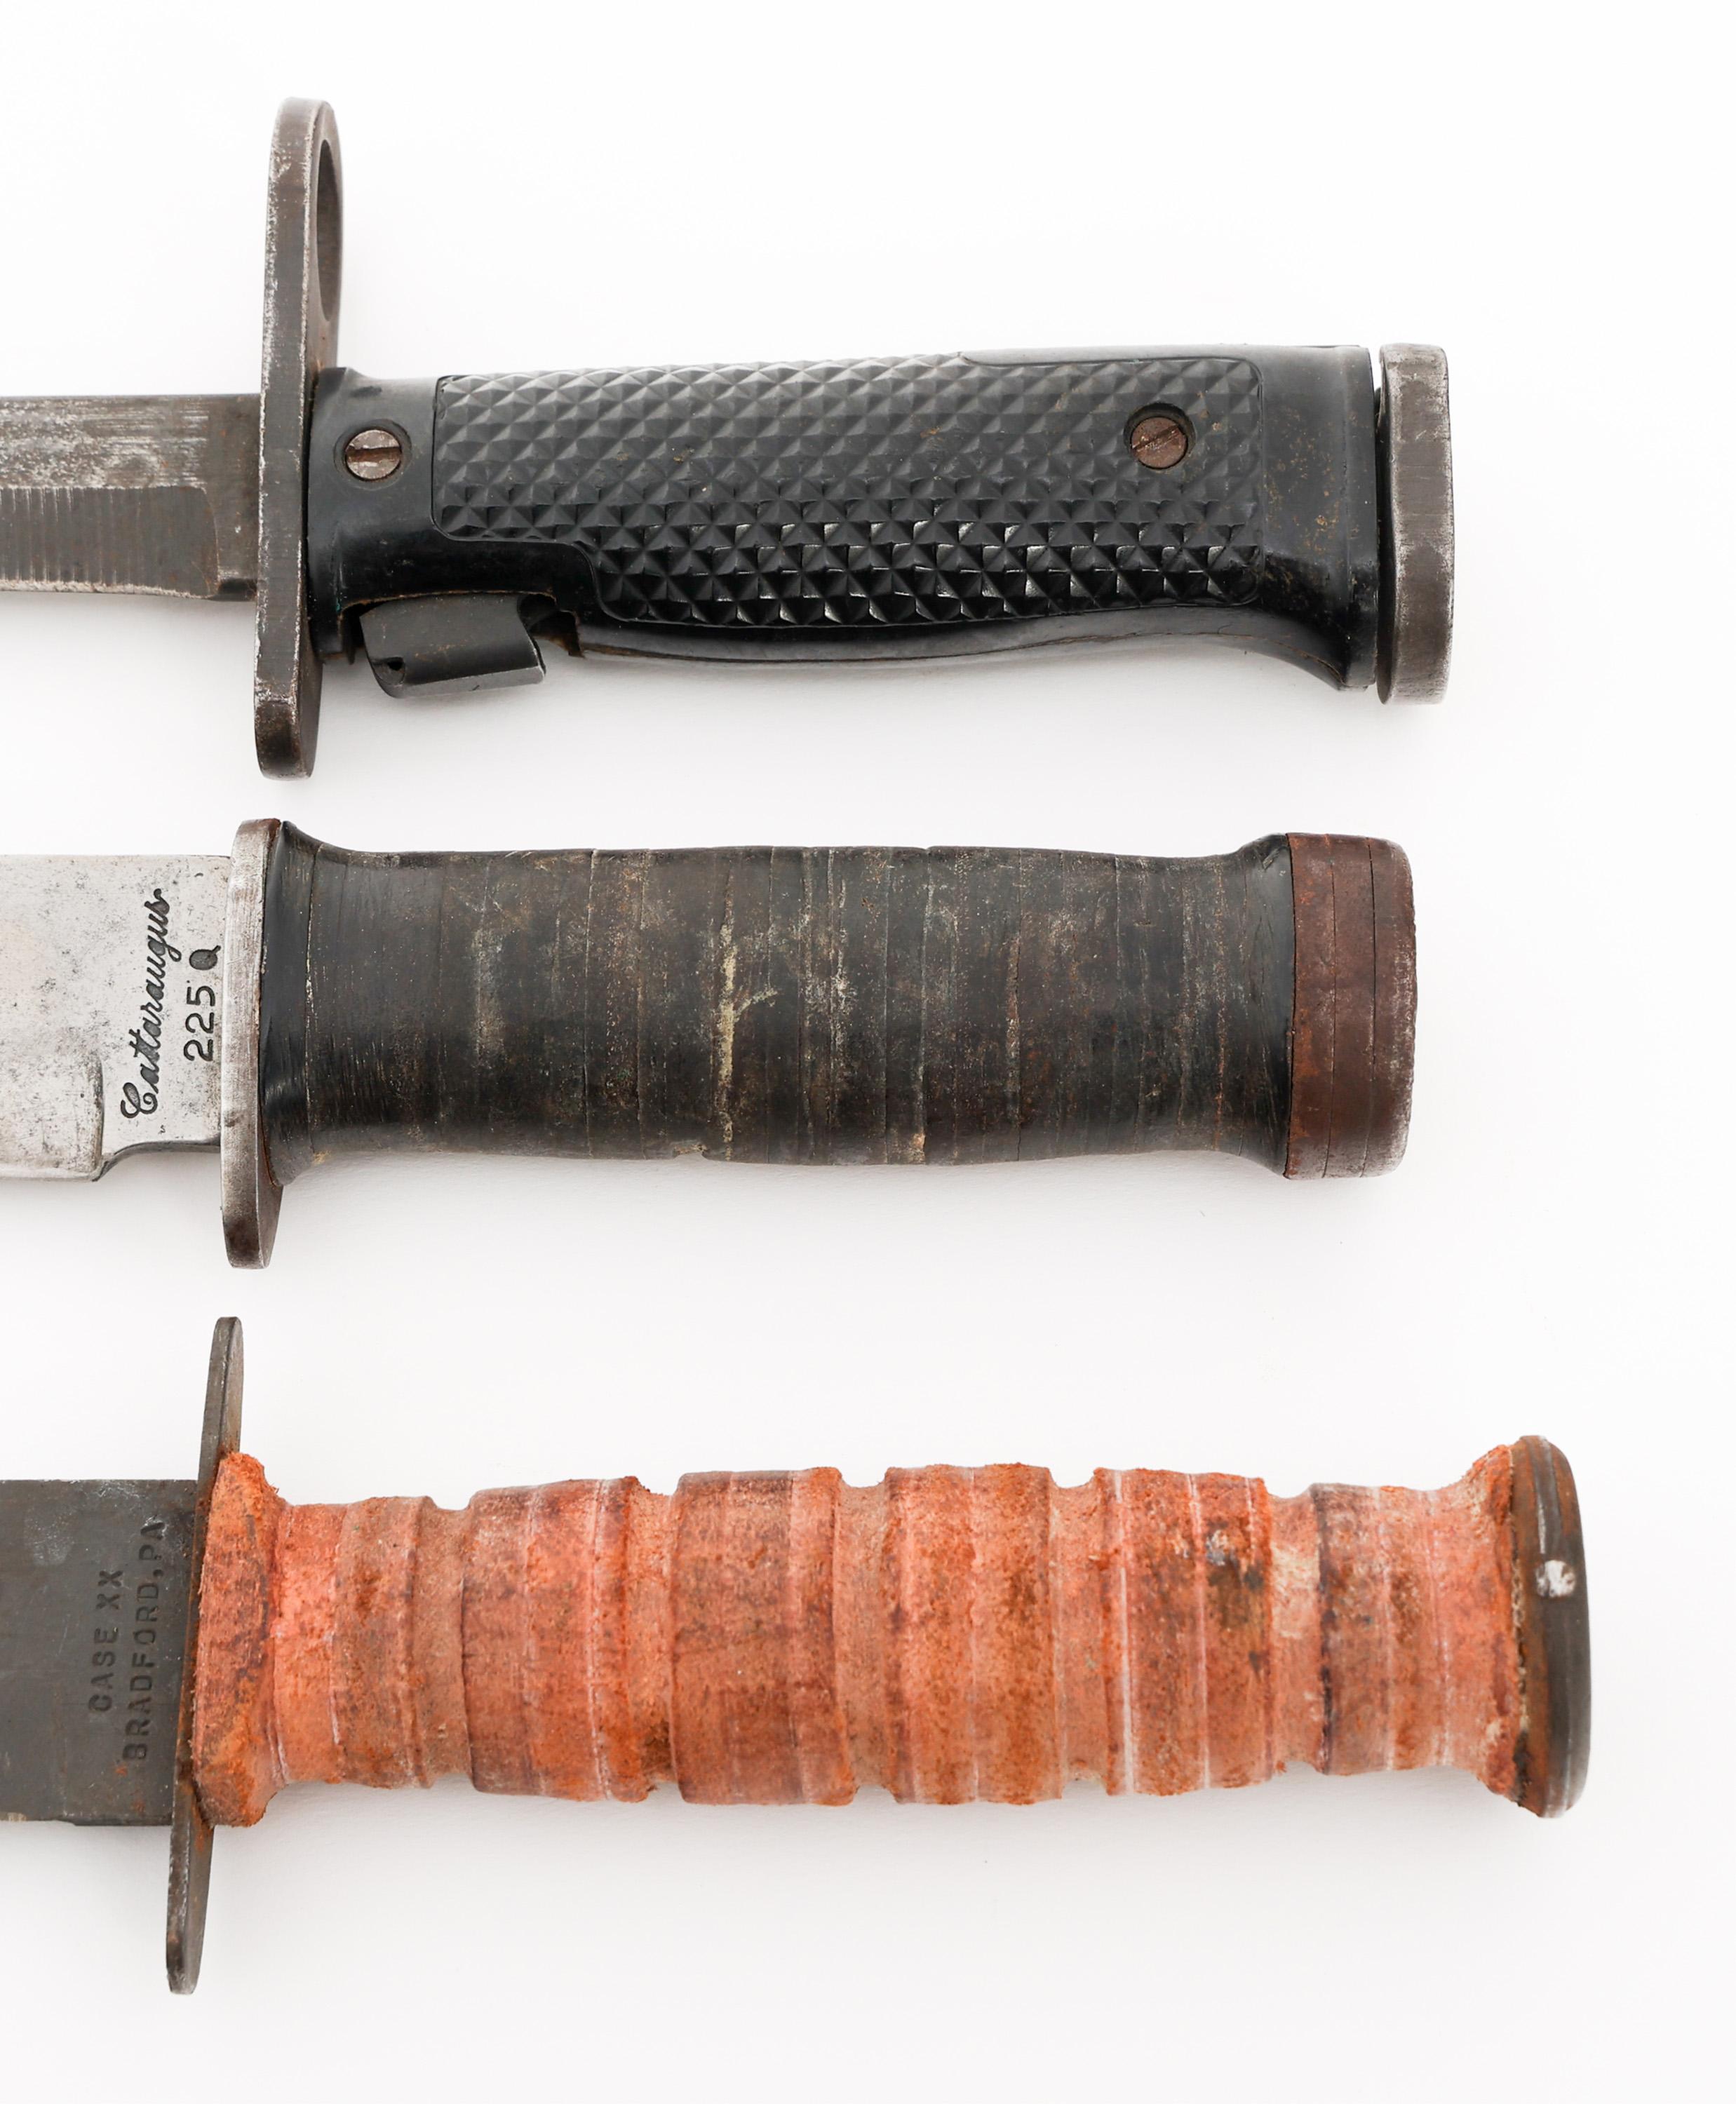 WWII - COLD WAR US FIGHTING KNIVES & BAYONET